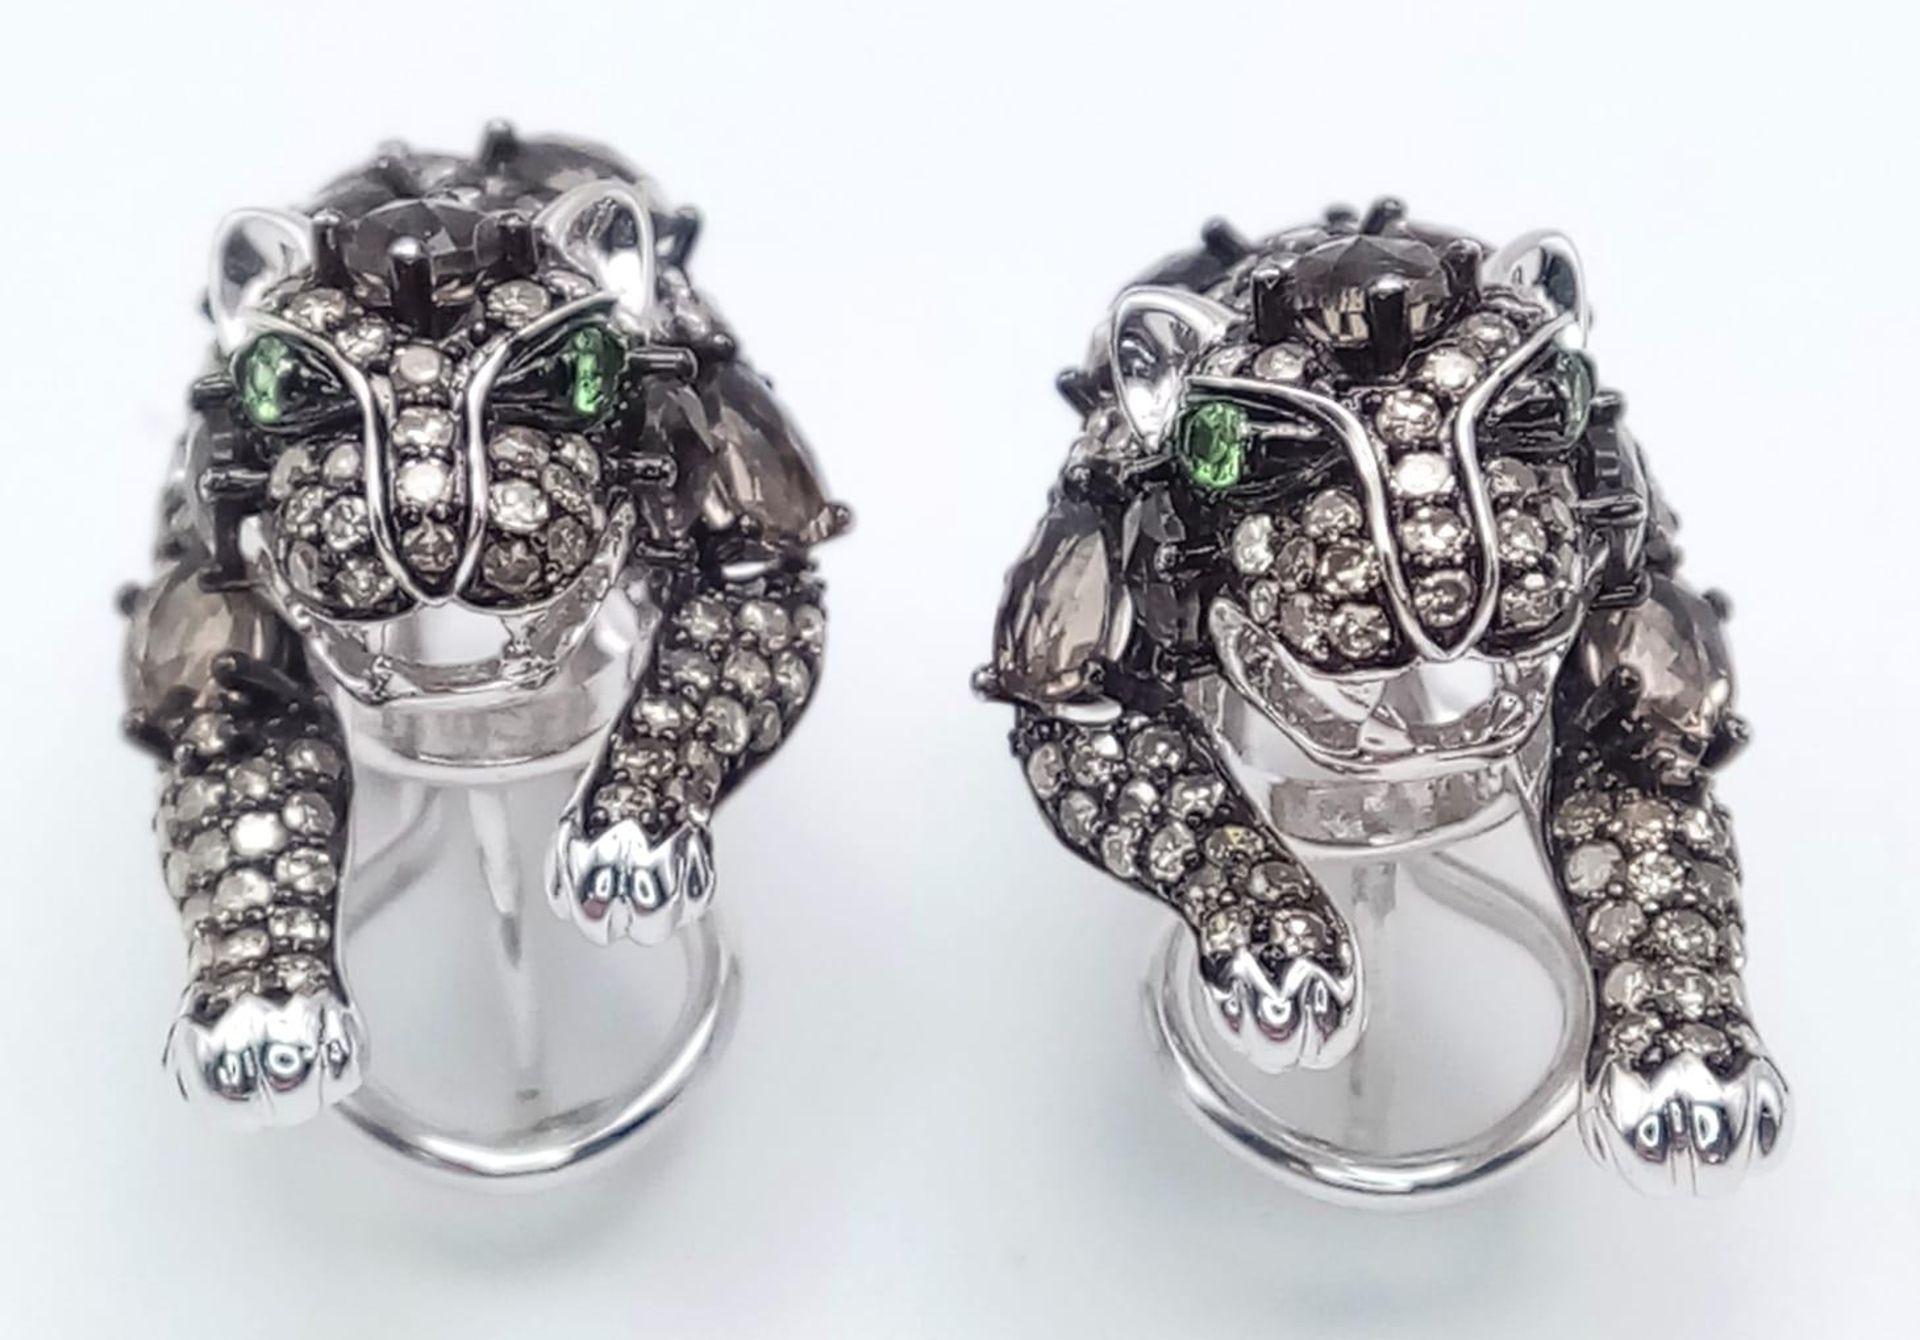 A STUNNING PAIR OF 14K WHITE GOLD DIAMOND , CHAMPAGNE DIAMONDS AND EMERALD PANTHER EARRINGS. 10.5gms - Image 2 of 8